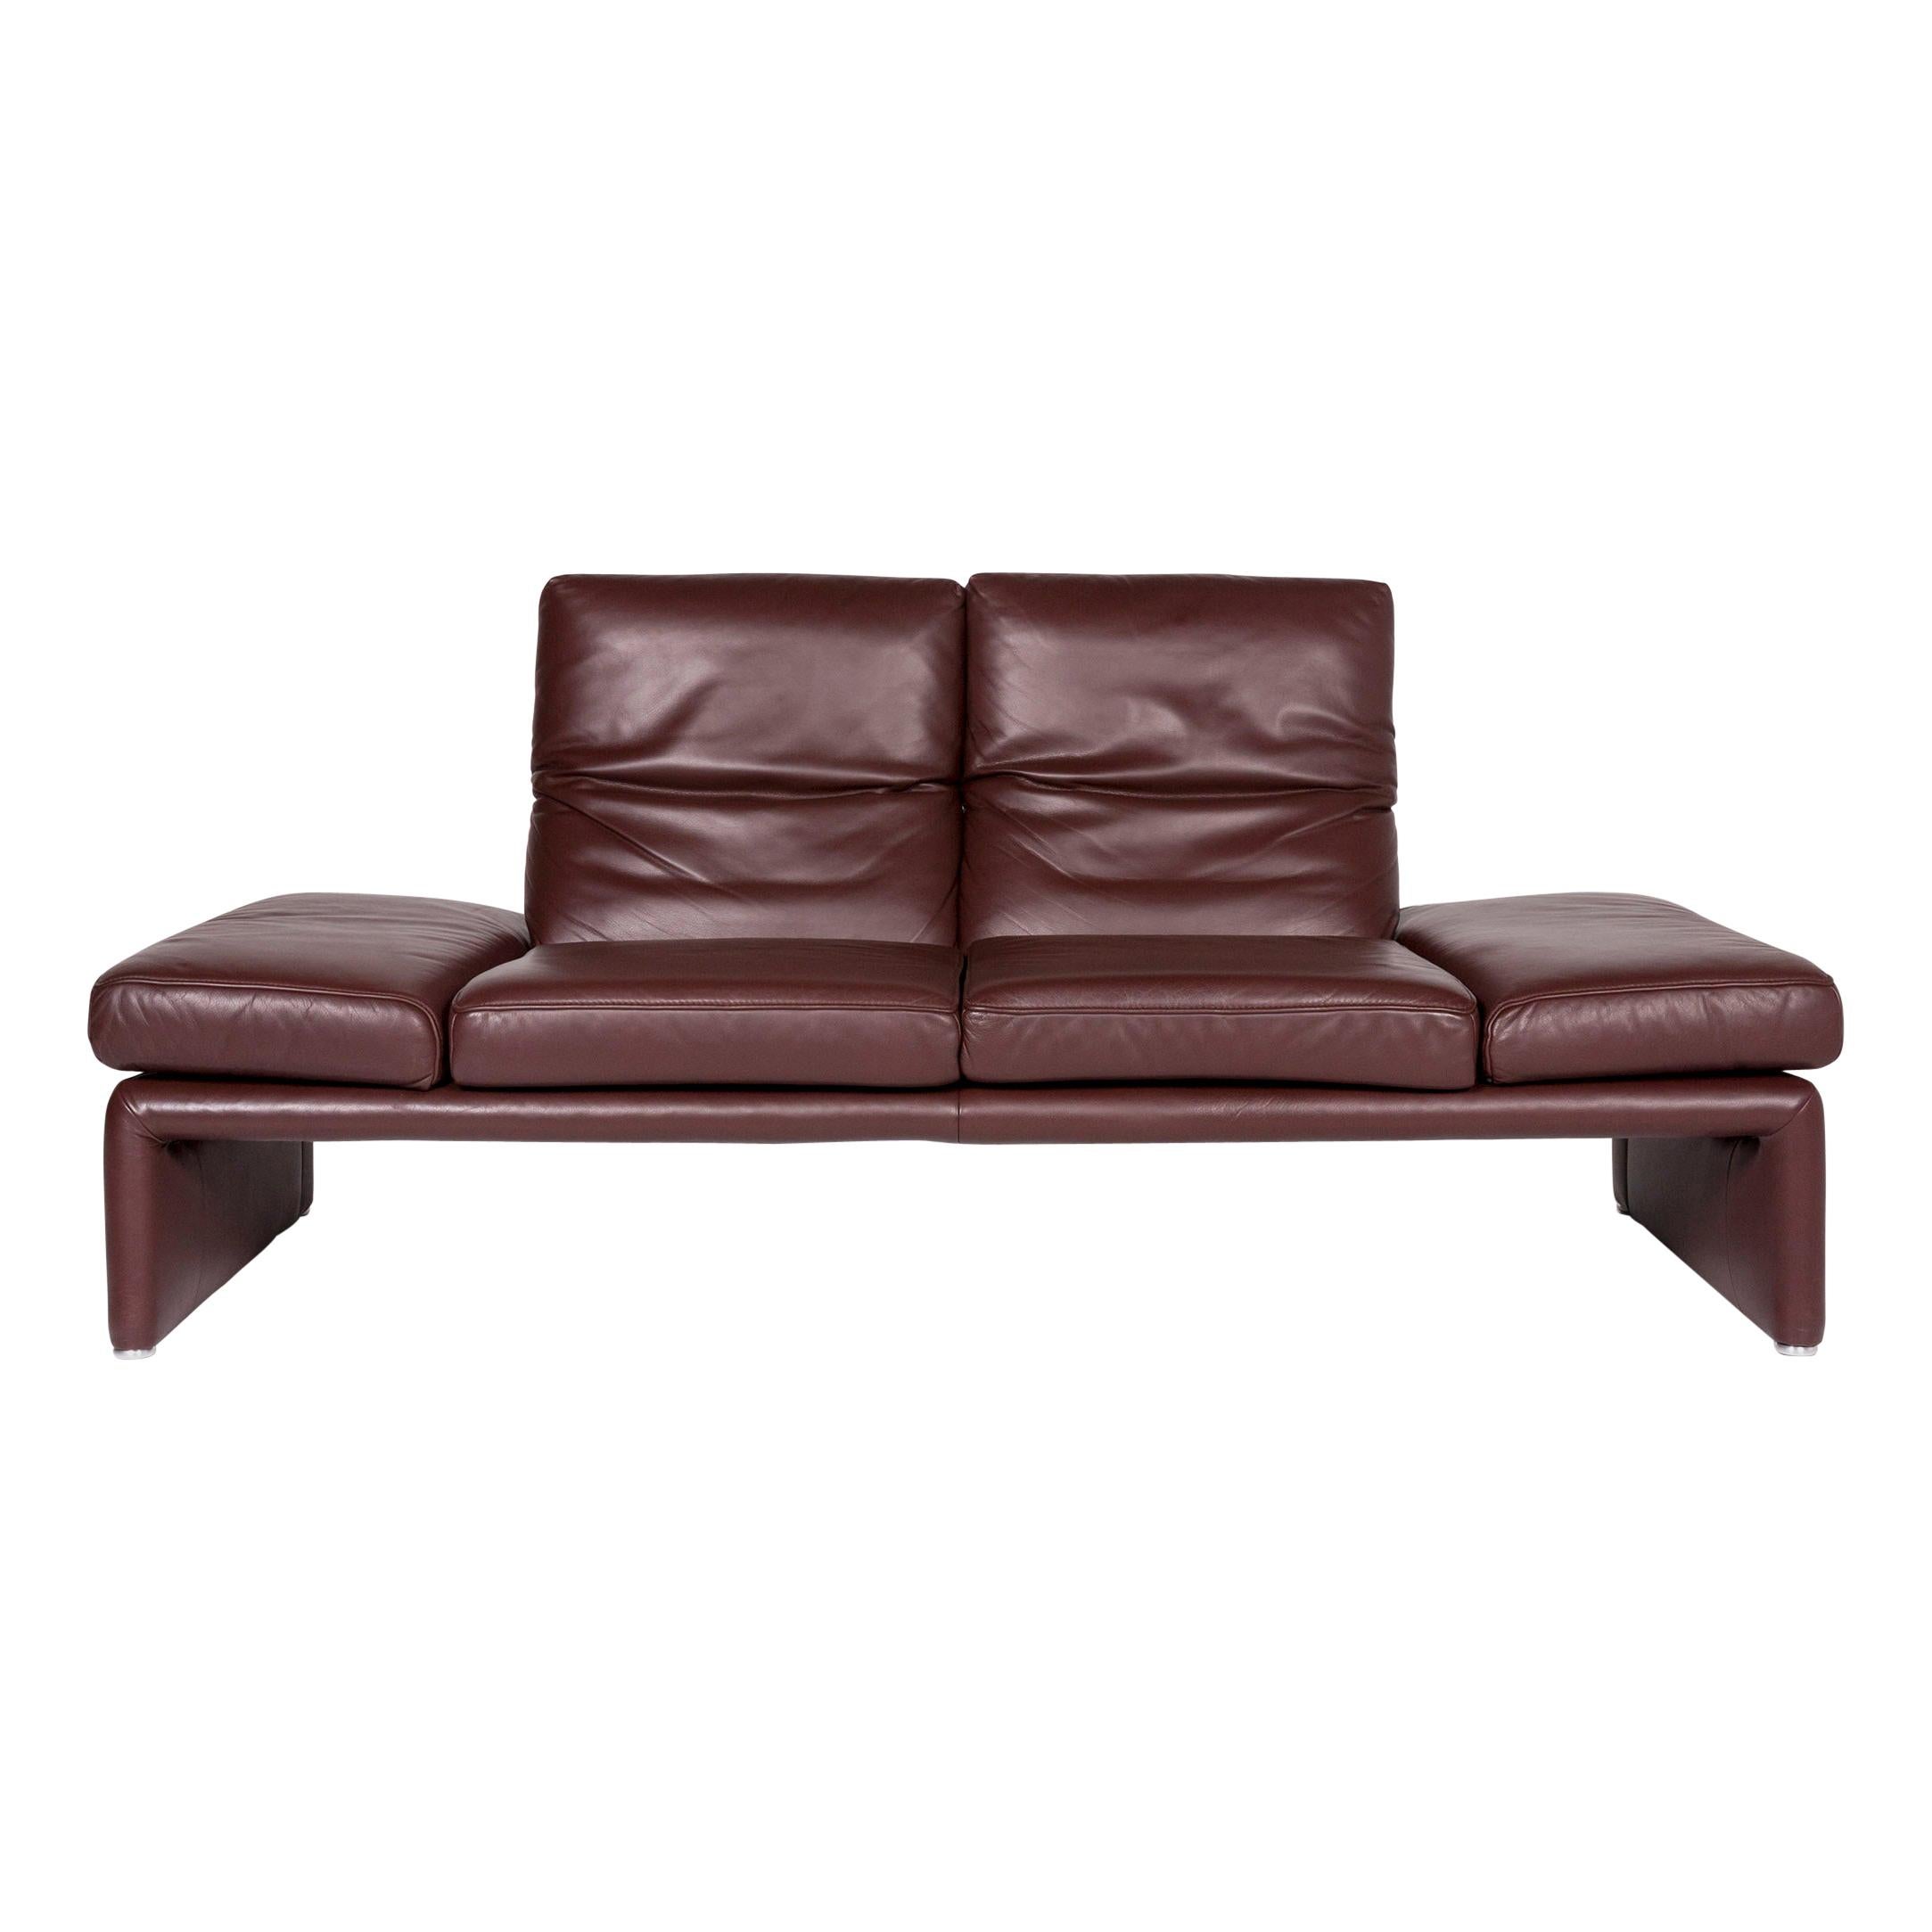 Koinor Raoul Leather Sofa Brown Red Brown Two-Seat Function